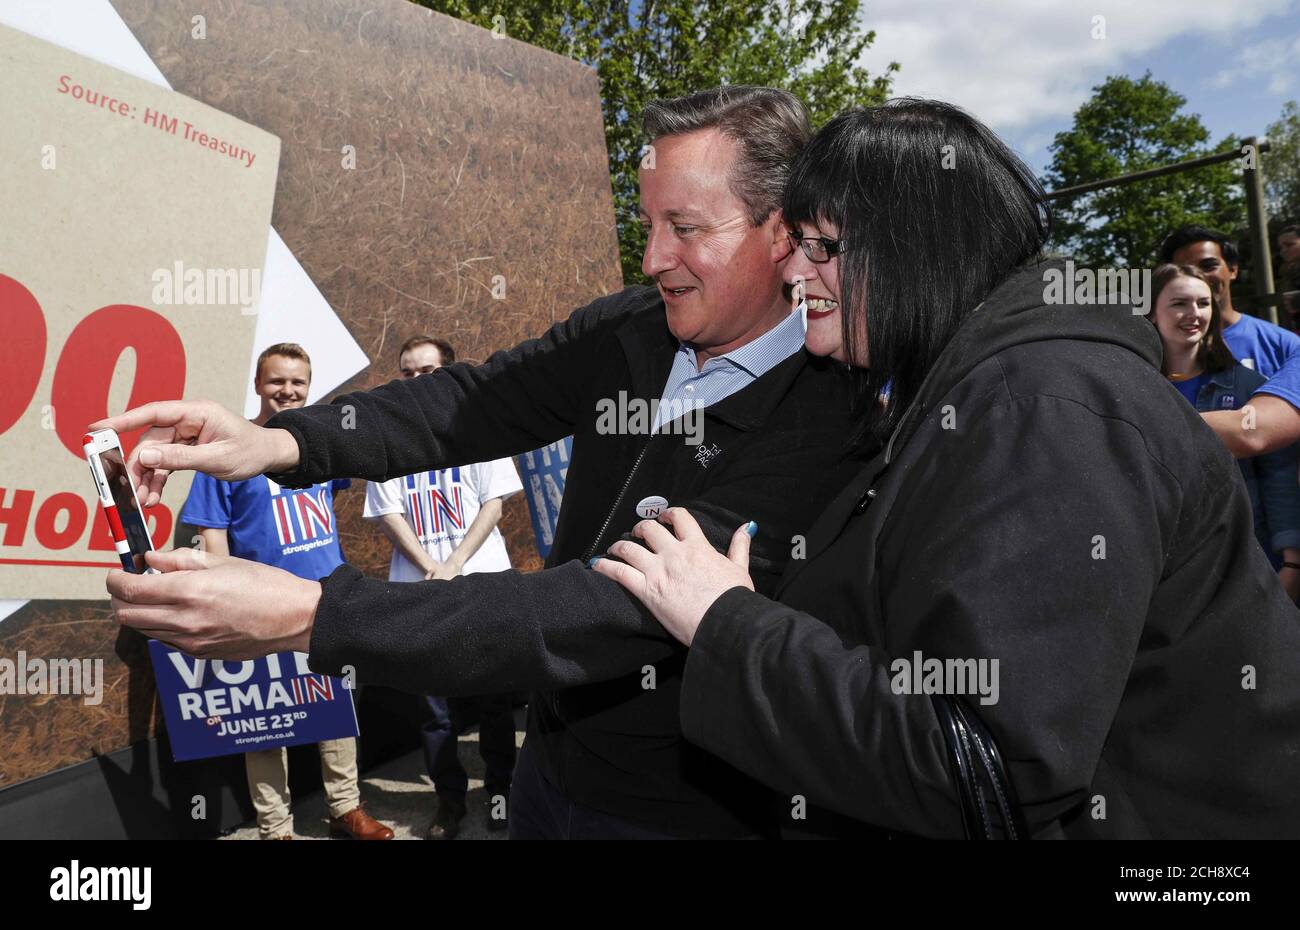 Prime Minister David Cameron poses for a selfie with a supporter at a Remain campaign event in his Witney constituency in Oxfordshire, where he warned that a vote to leave the European Union could tip the British economy back into recession. Stock Photo